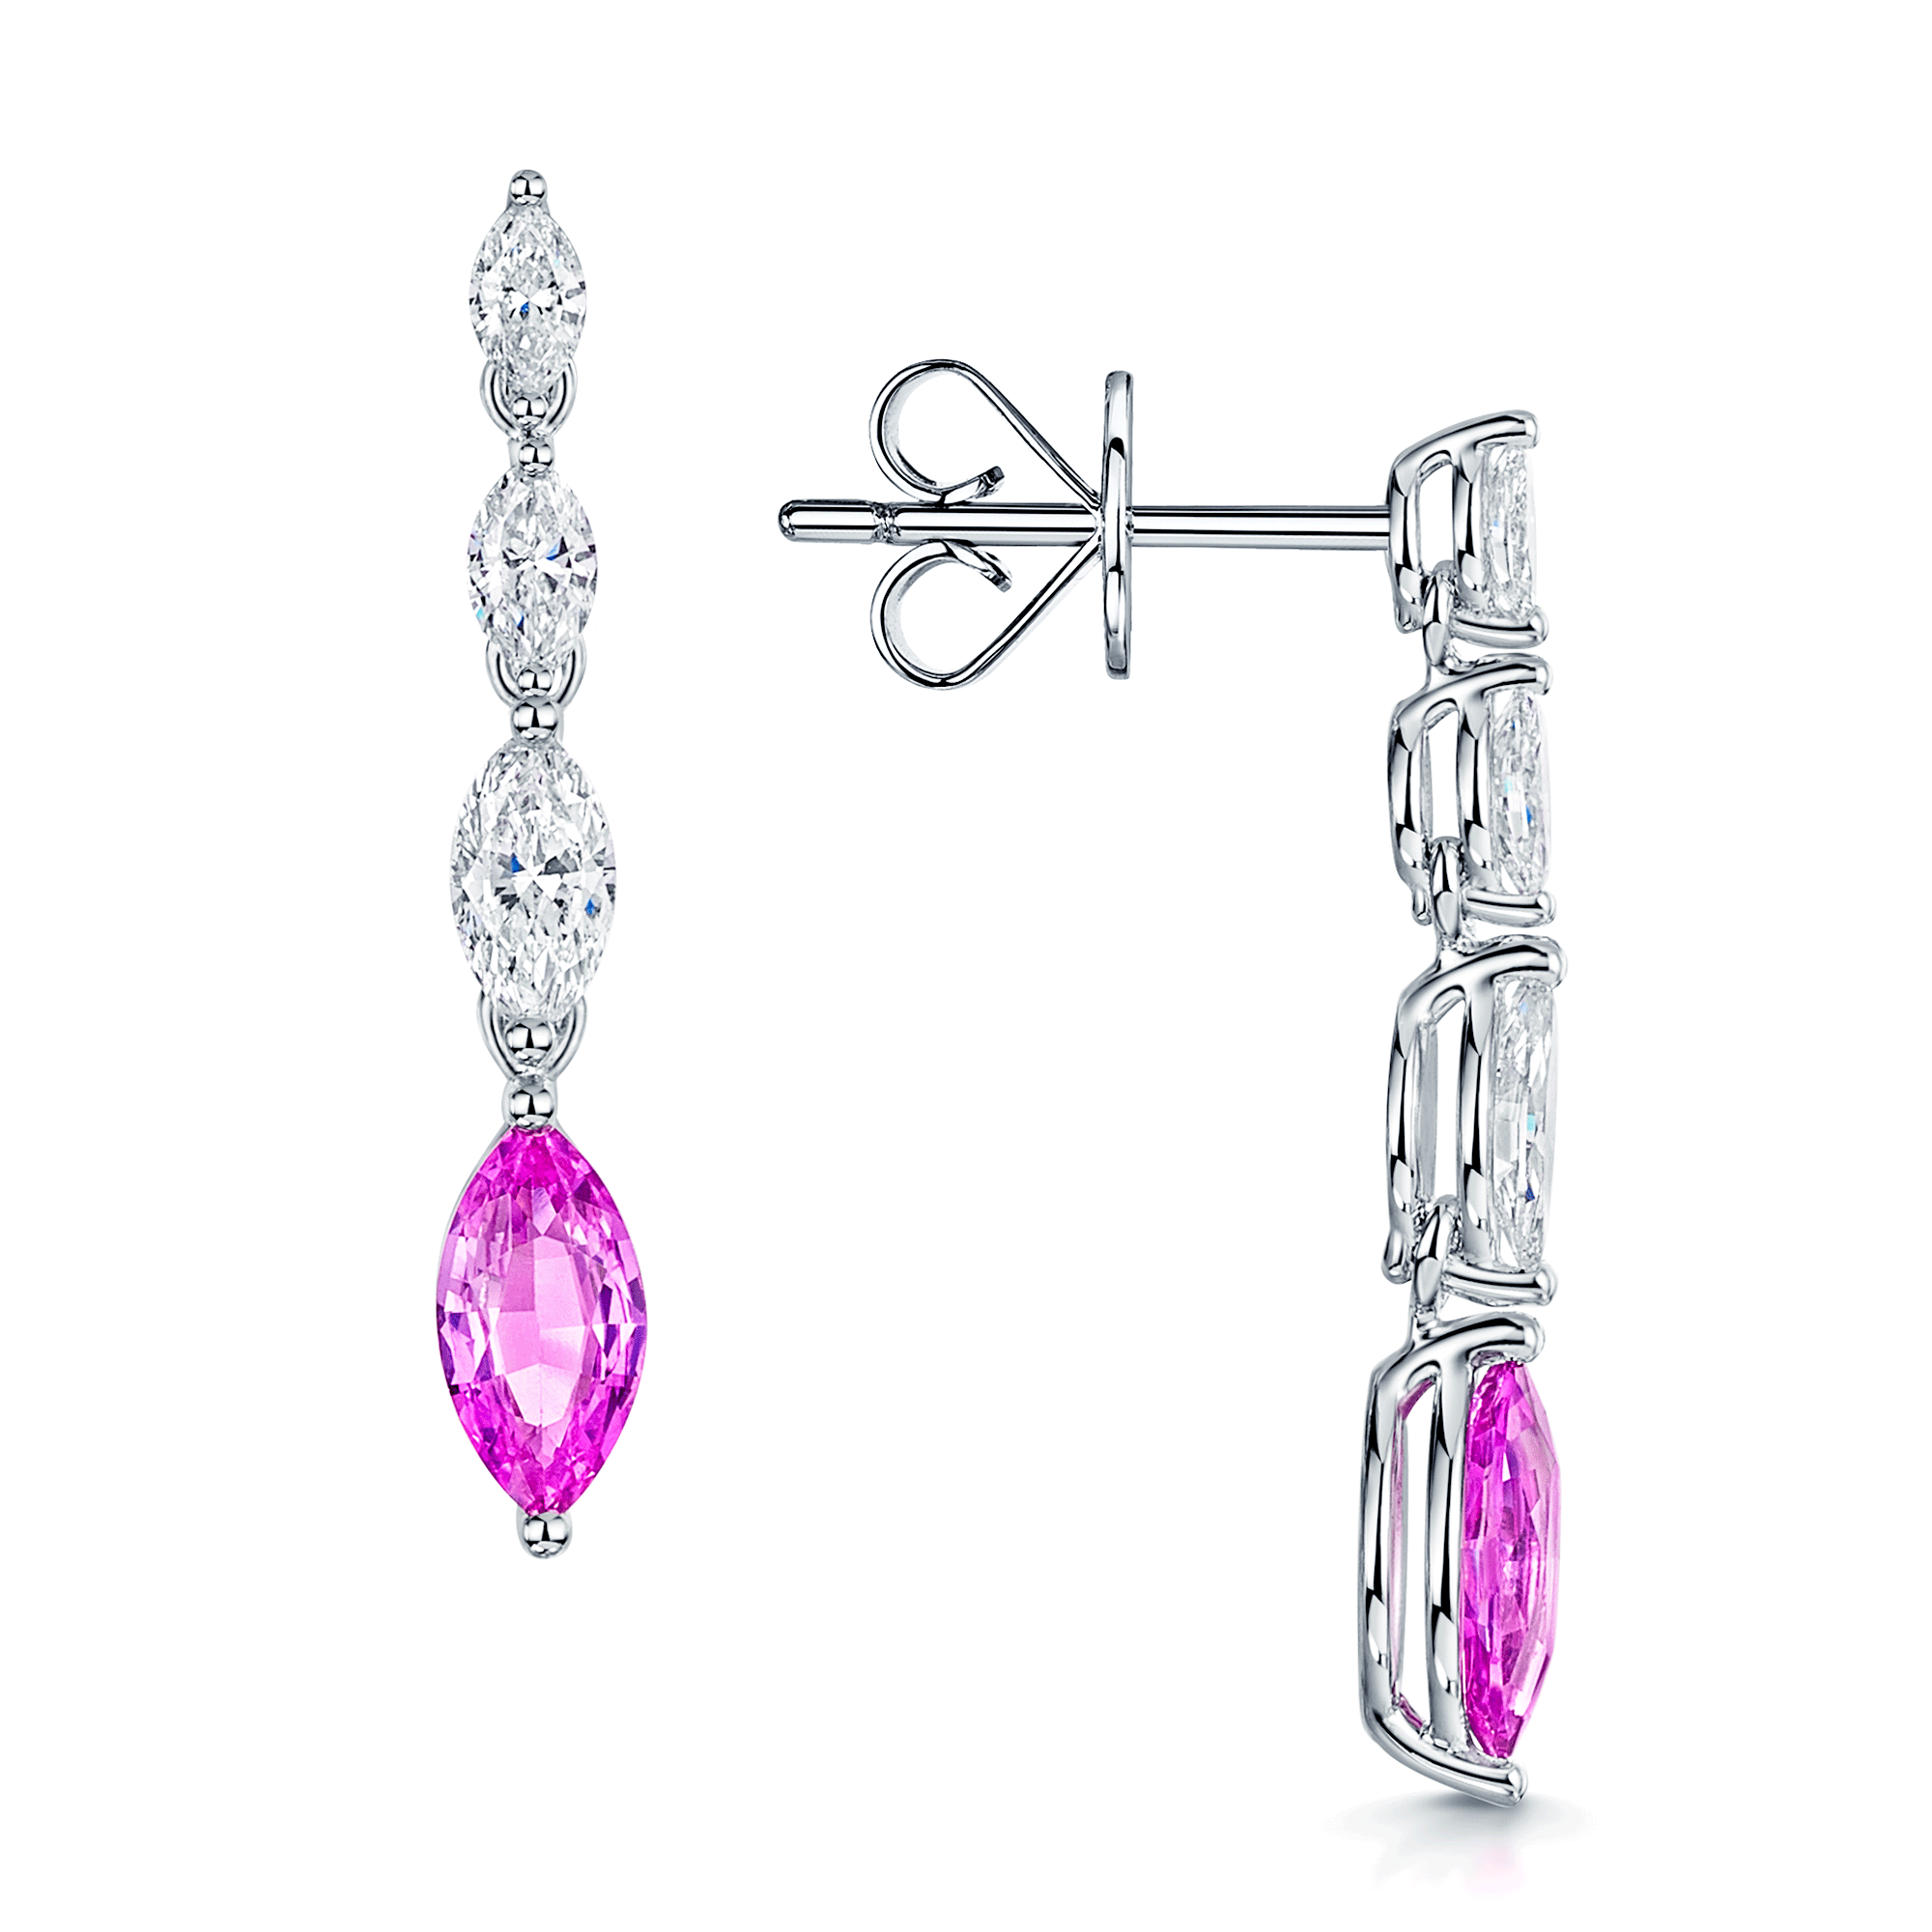 18ct White Gold Marquise Cut Pink Sapphire and Diamond Drop Earrings